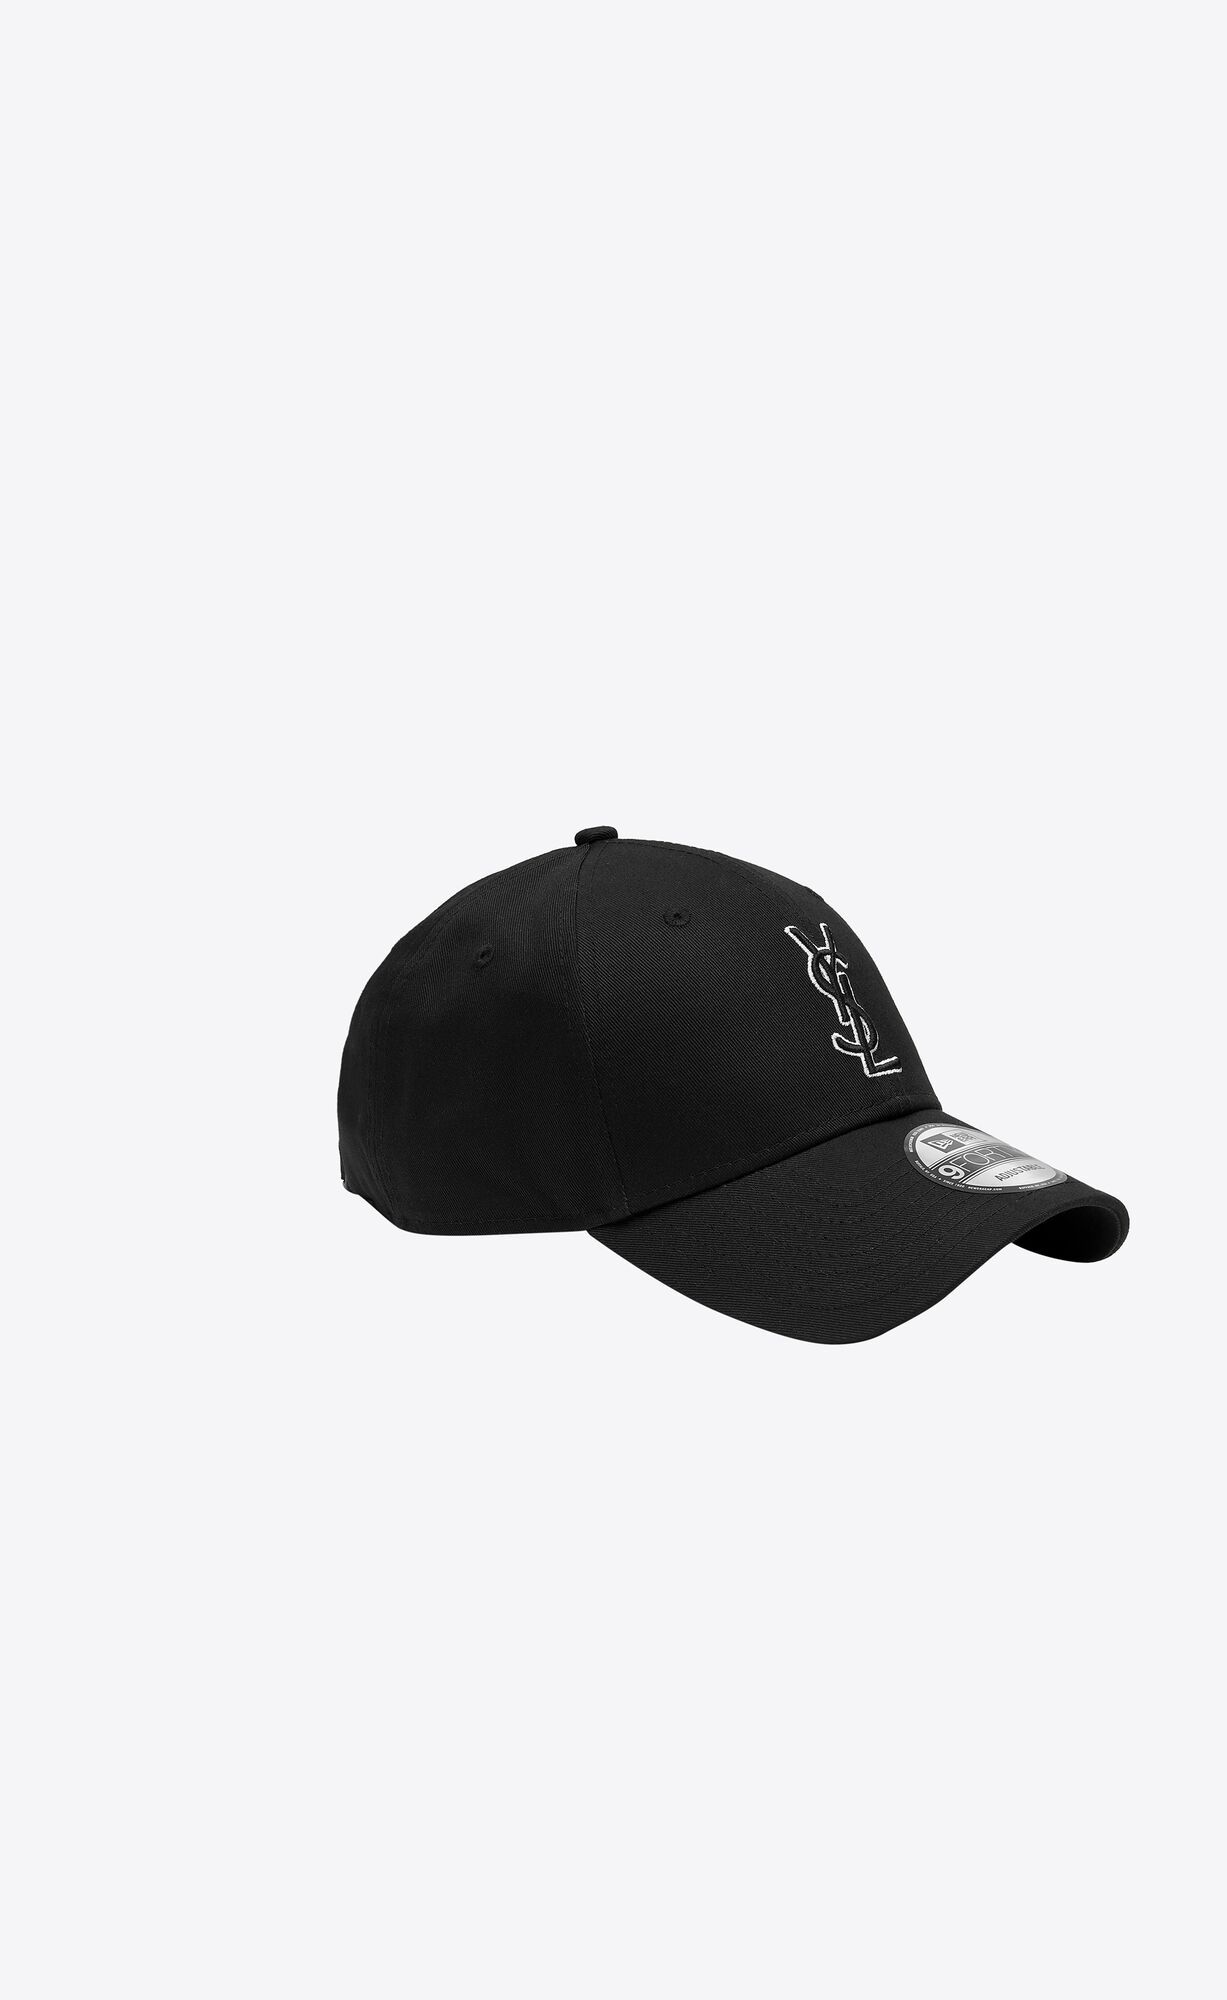 CASSANDRE embroidered cap made in collaboration with New Era. | Saint Laurent Inc. (Global)